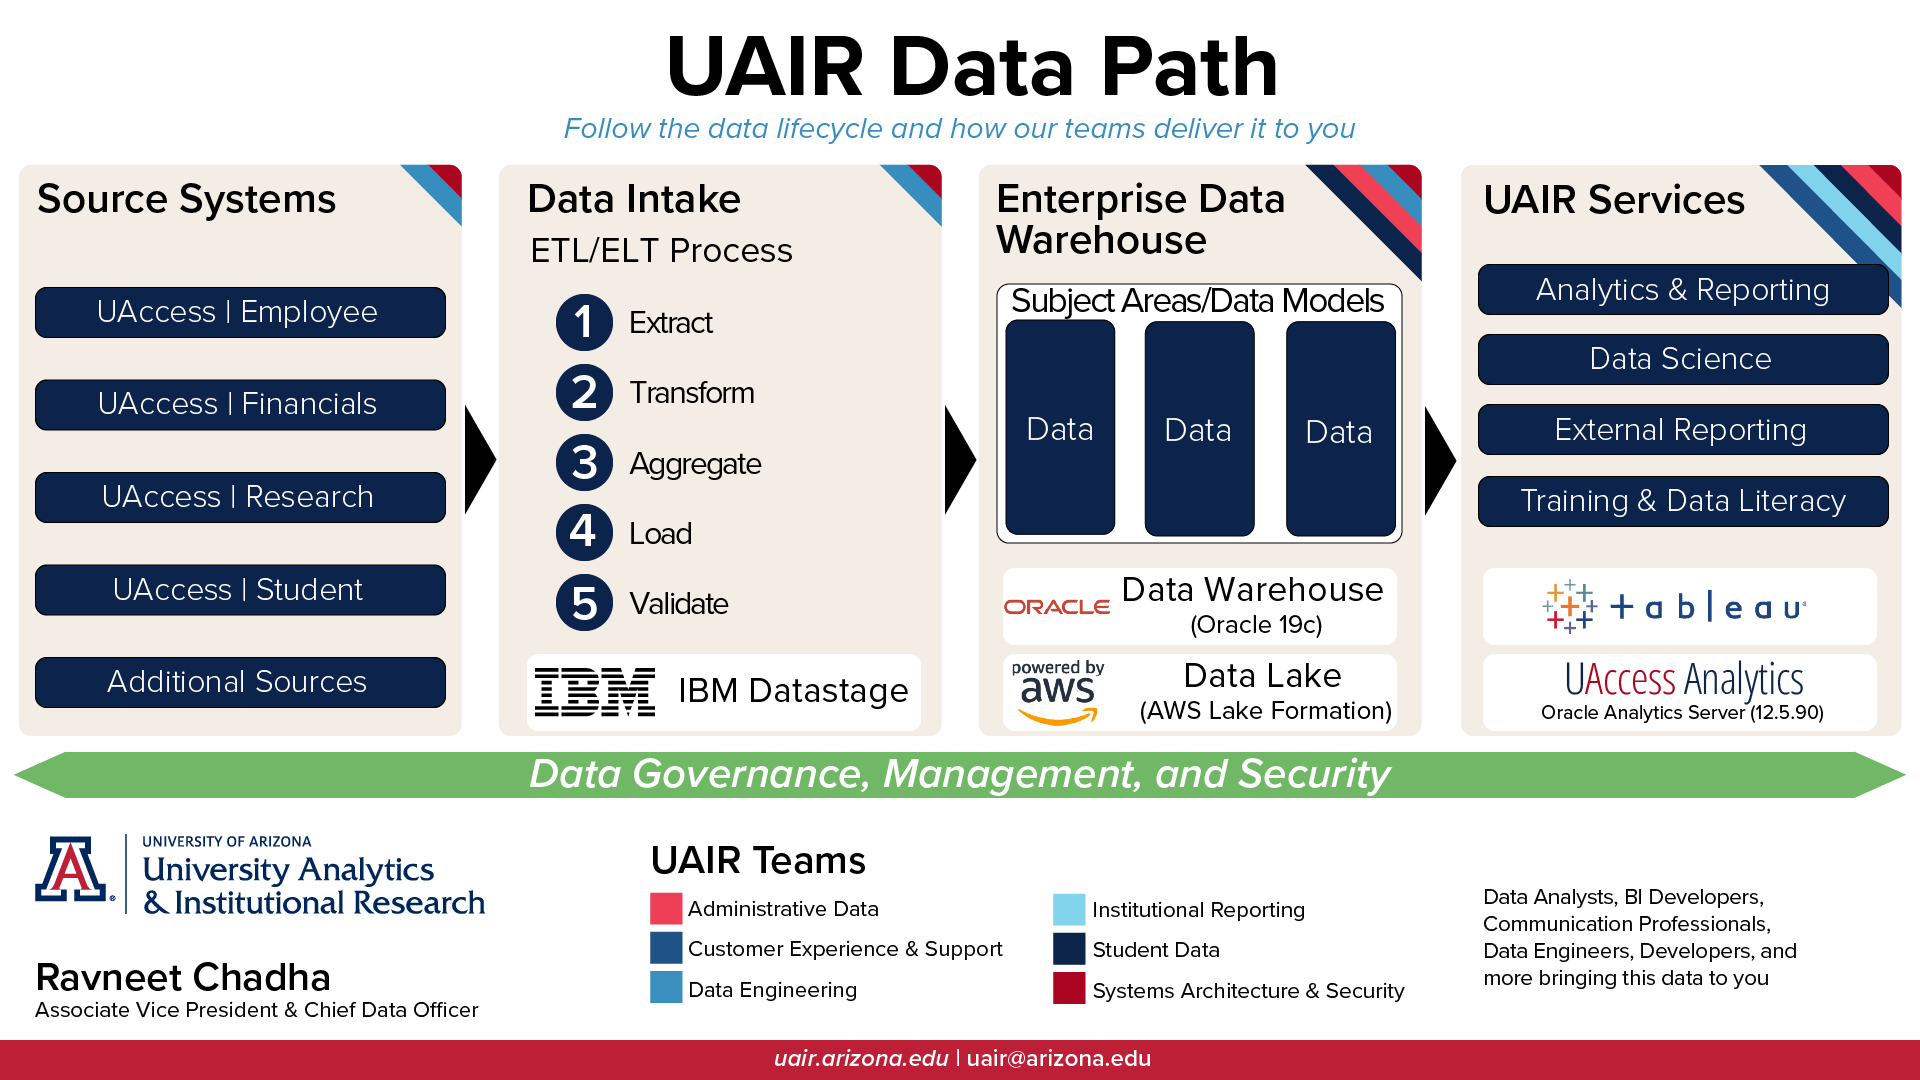 Diagram showing flow of university data from source systems to UAIR services.